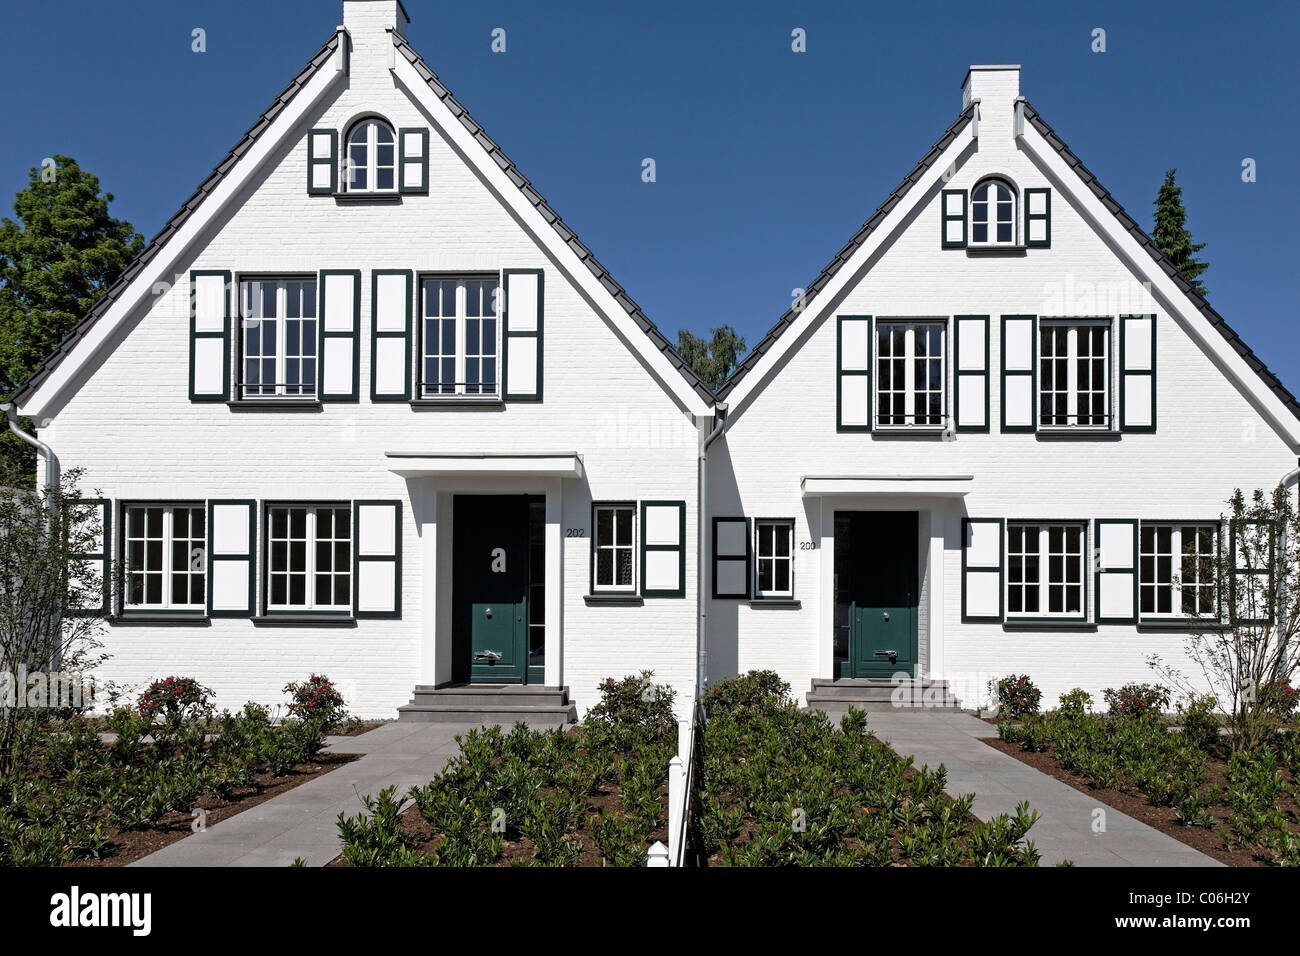 Two identical houses side by side, ready for moving in, Duesseldorf, North Rhine-Westphalia, Germany, Europe Stock Photo